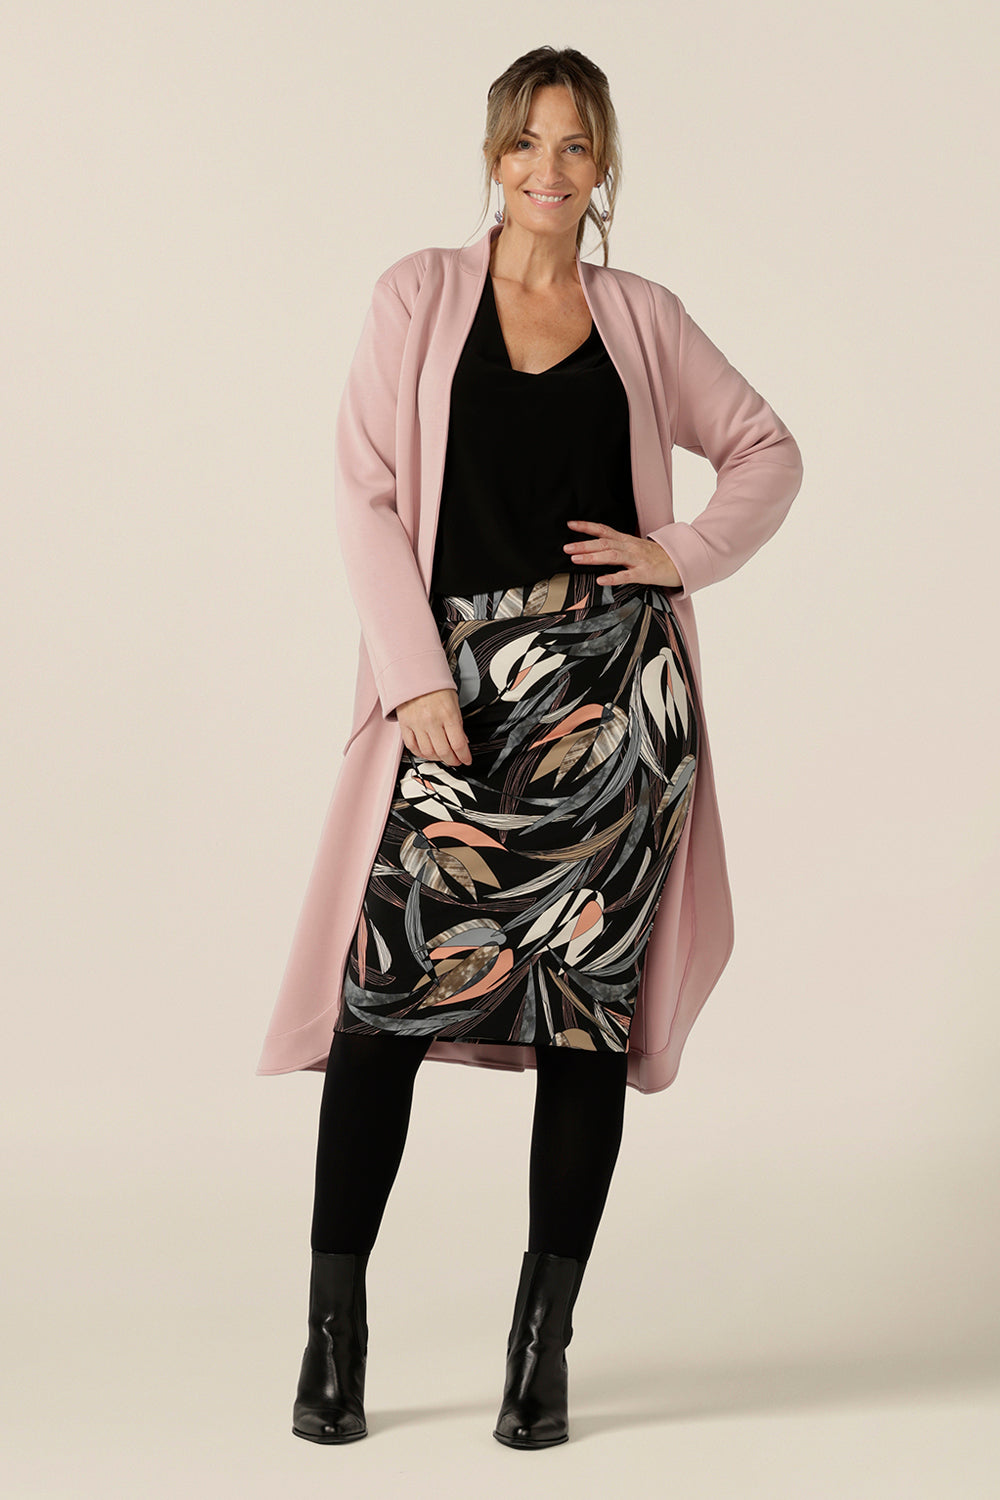 A woman wears a knee-length, tube skirt in floral print stretch jersey, size 10 with a long sleeve, black V-neck top and pink trenchcoat.  A good skirt for work and casual wear , this tube tube skirt is made in Australia by Australian and New Zealand women's clothing brand, L&F.